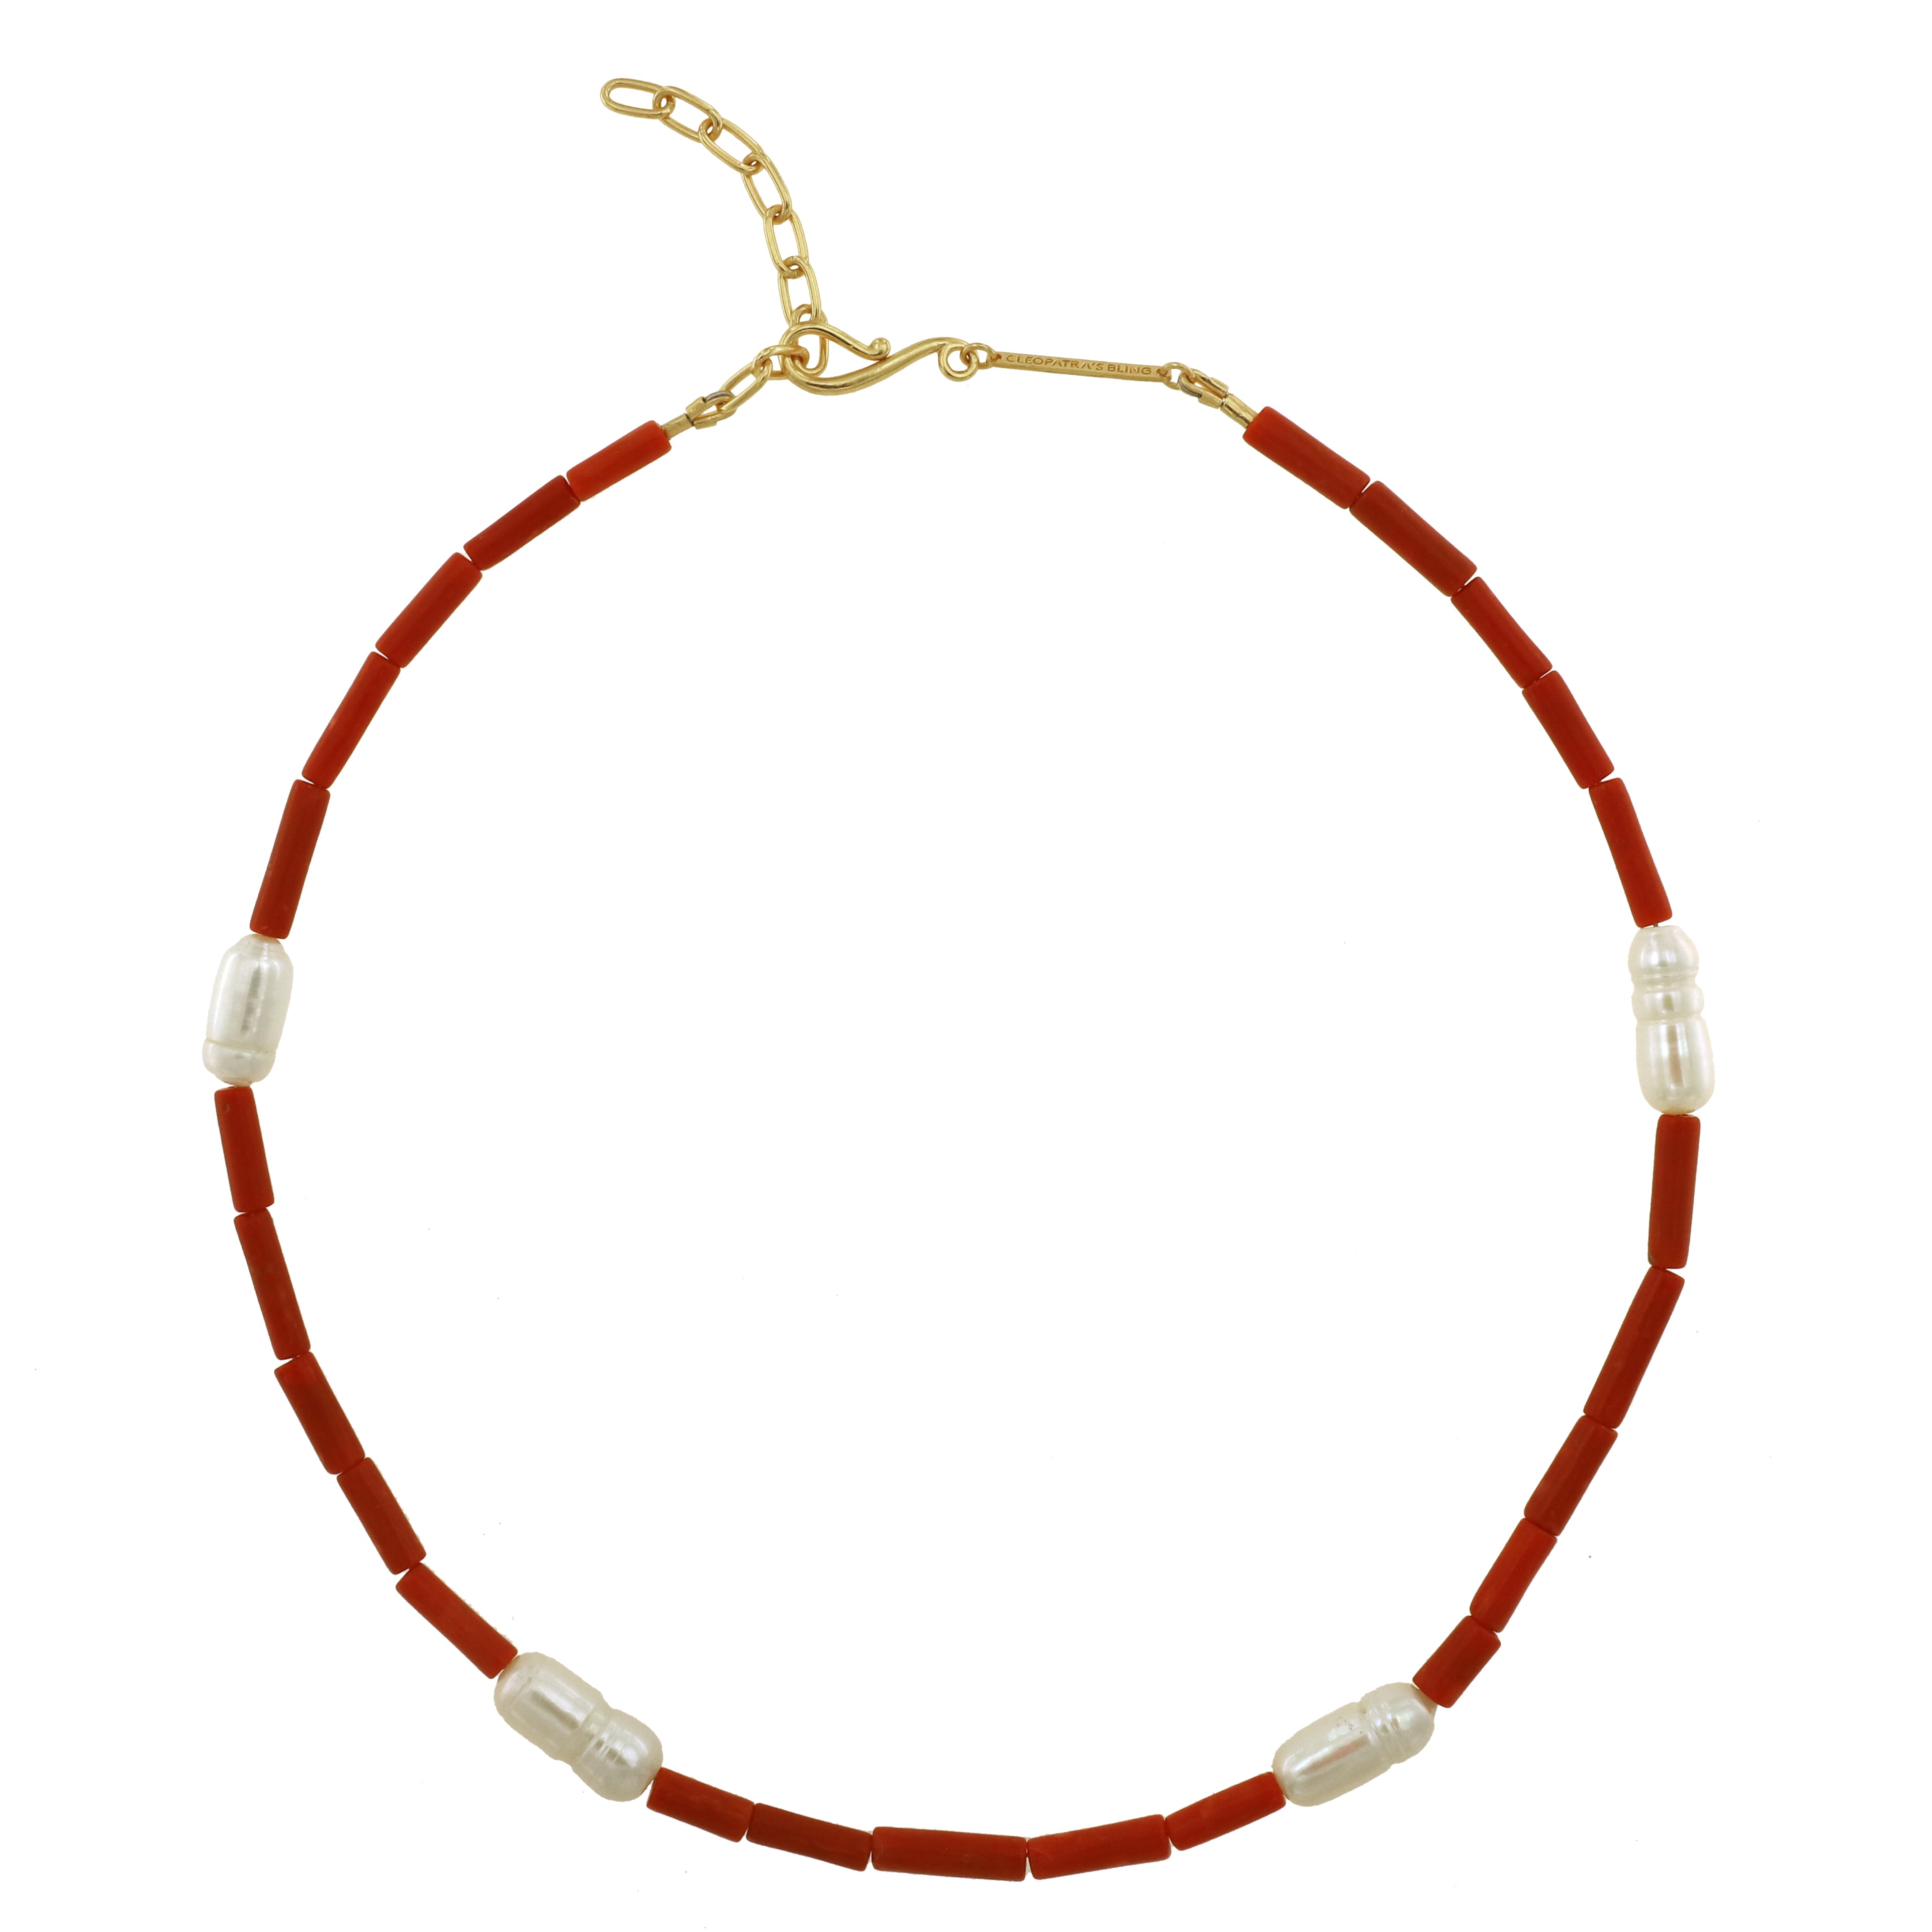 CO.NK.135 Necklace – 18K Gold Plated